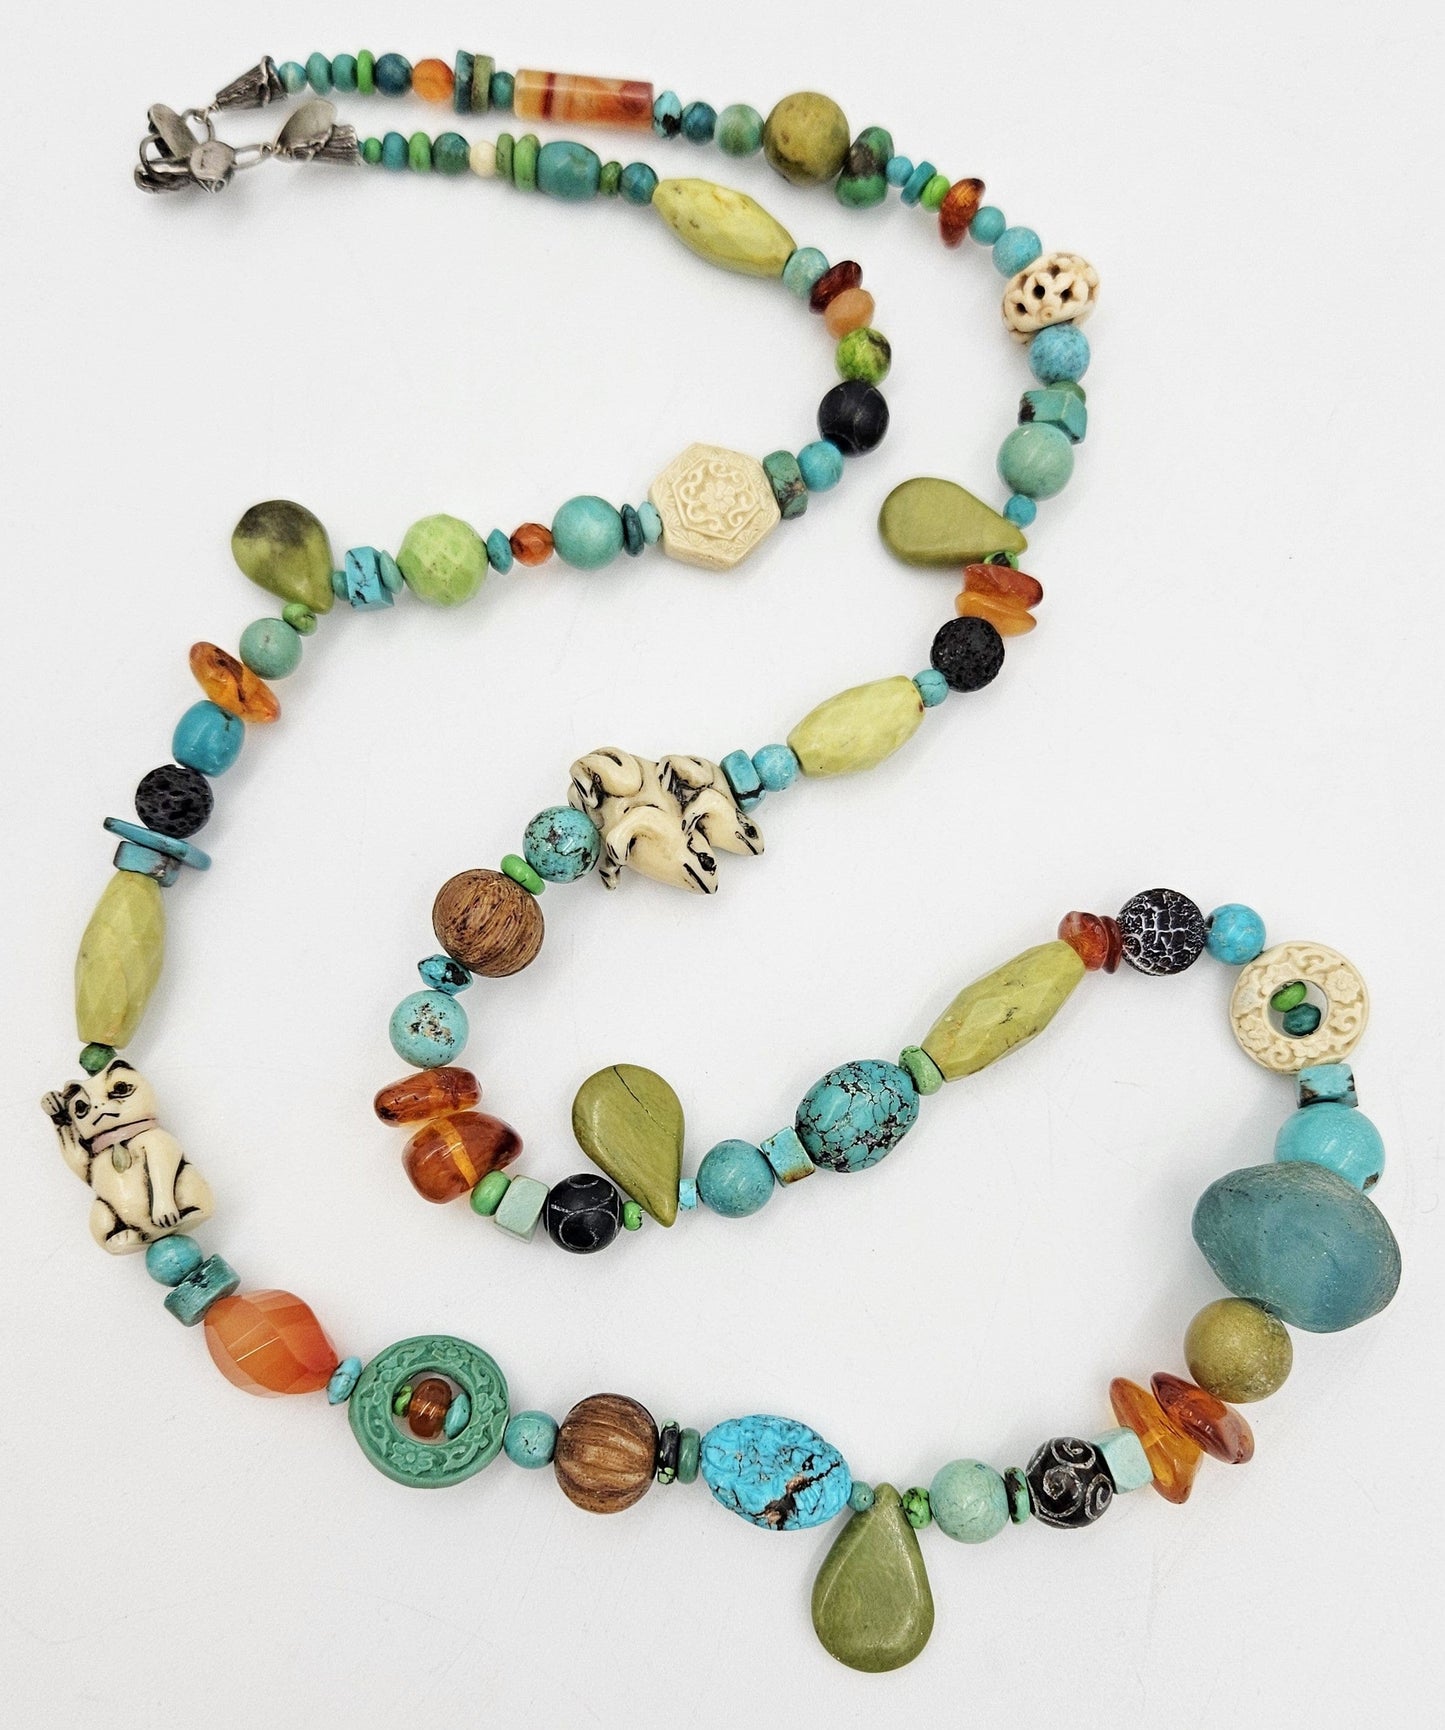 Echo of the Dreamer Jewelry Designer Echo of the Dreamer Sterling & Stones Runway Necklace